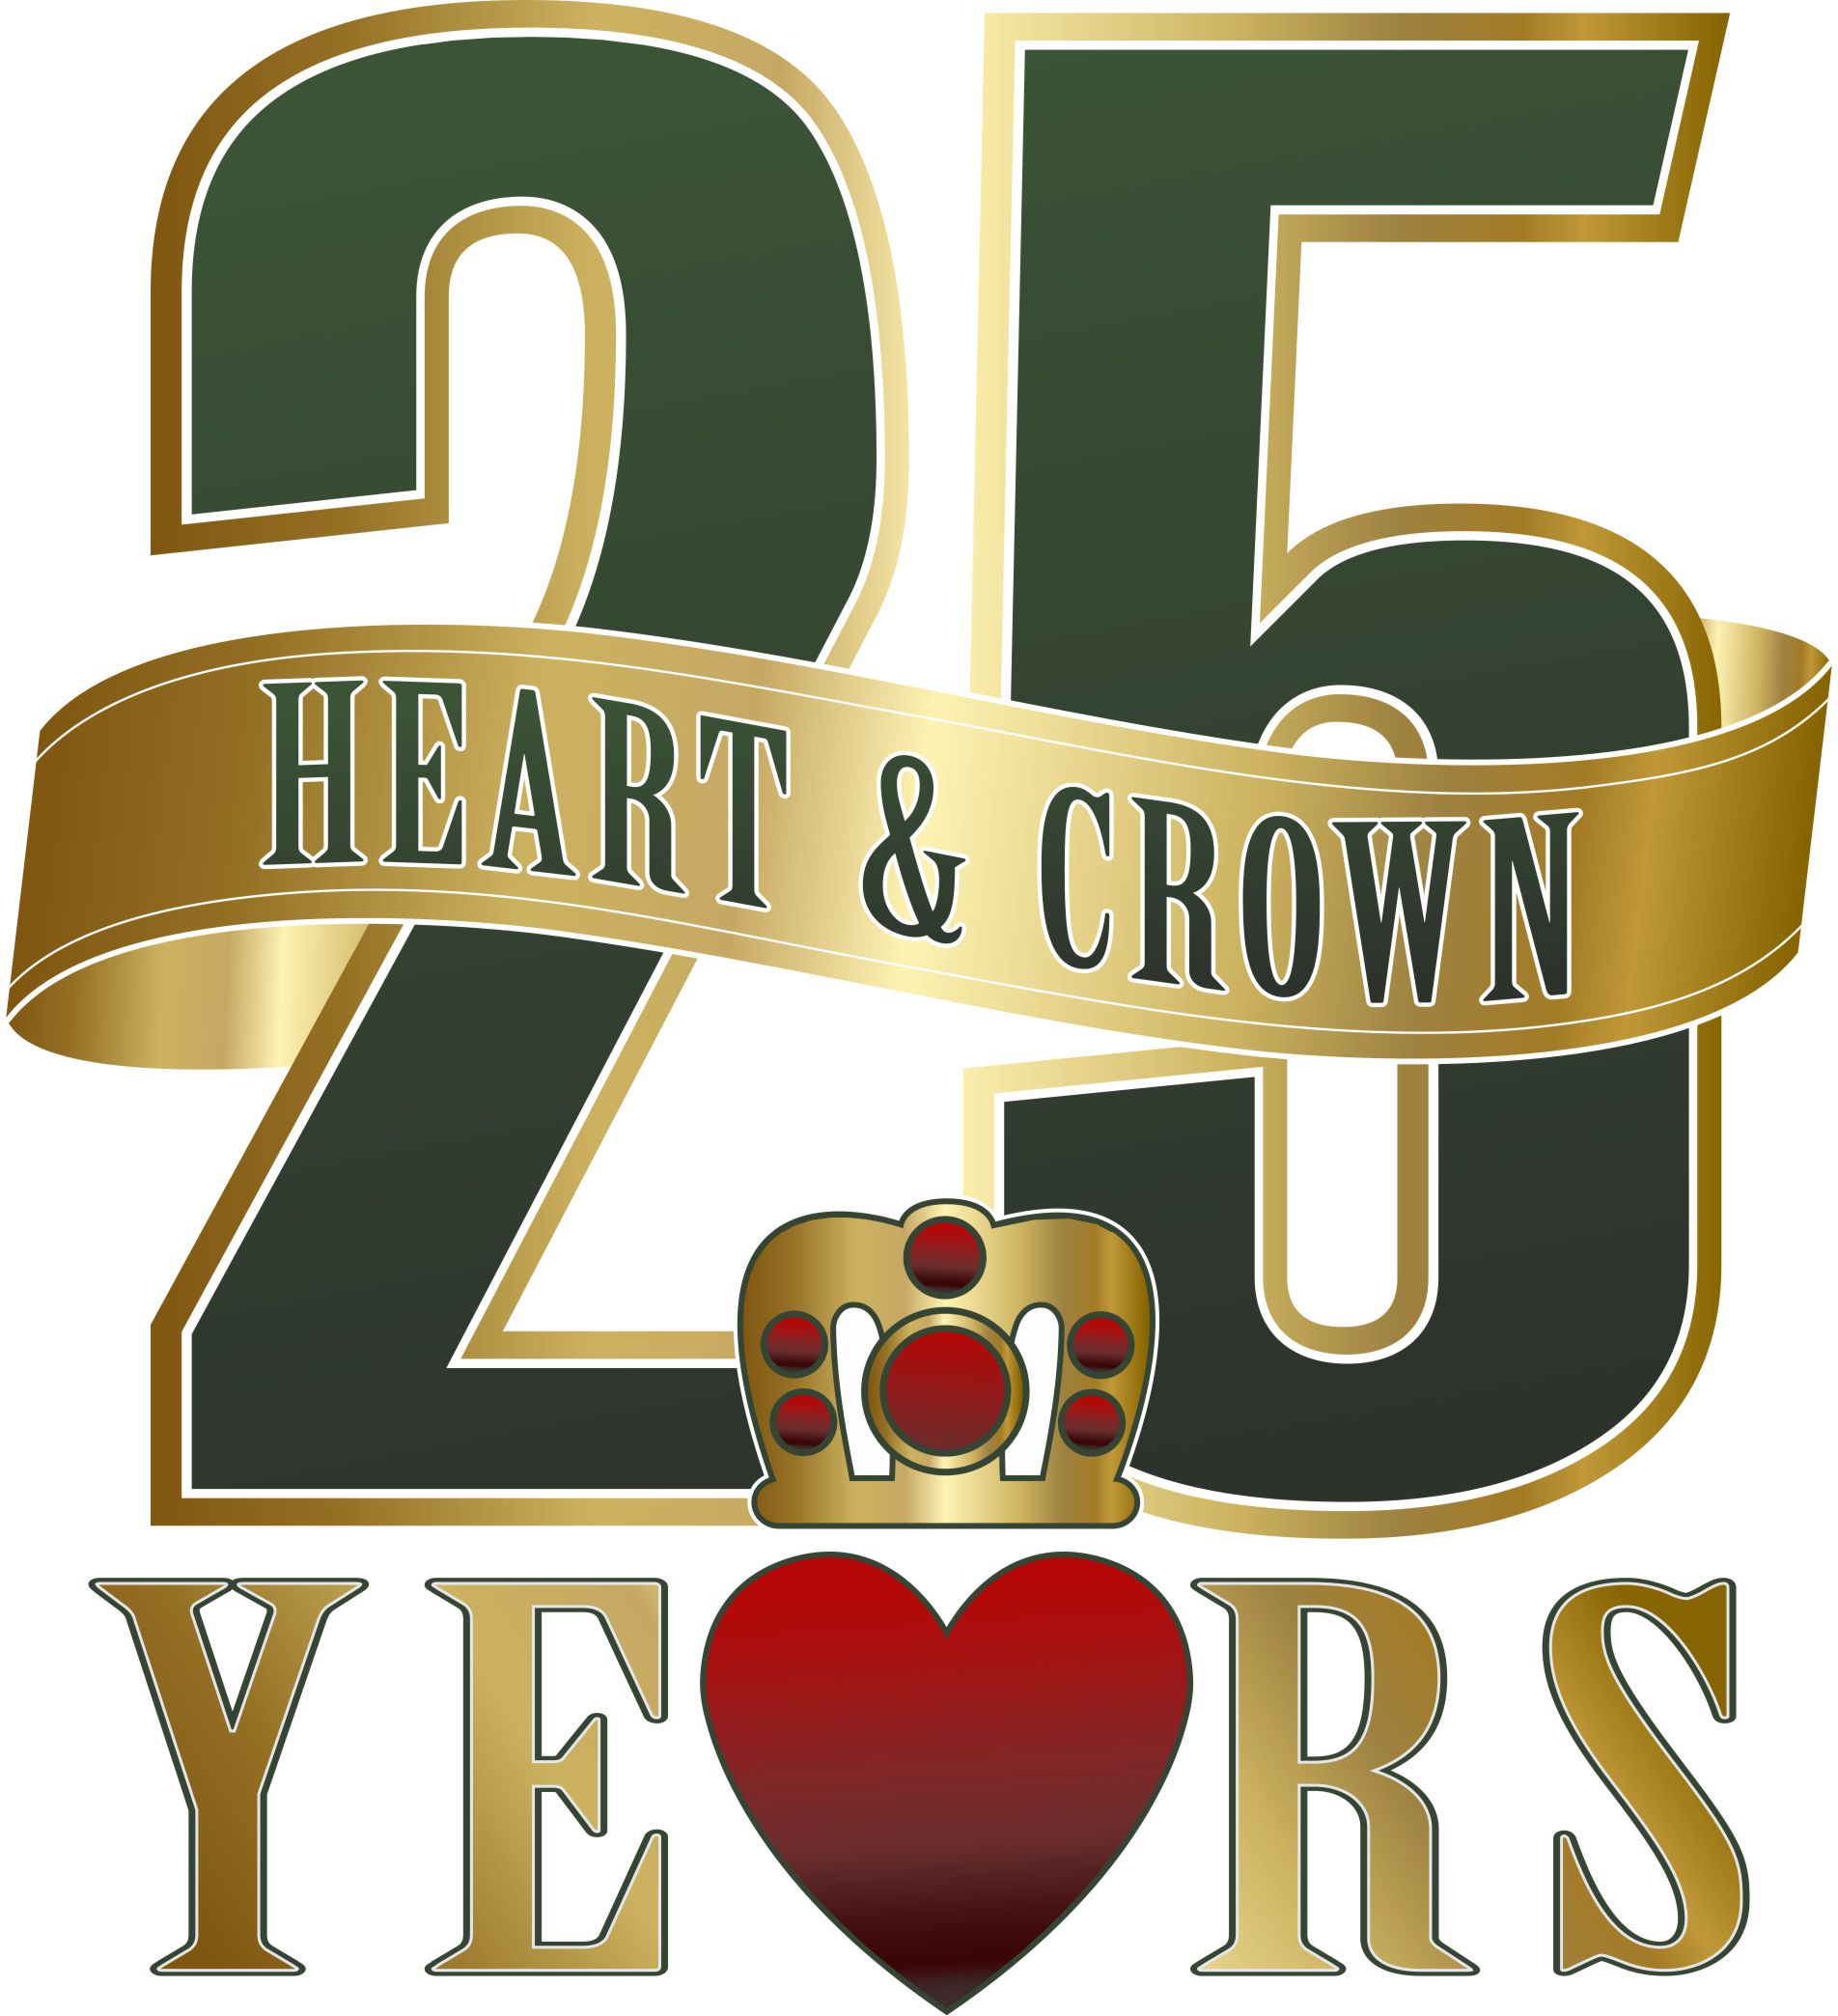 Heart and Crown Pub